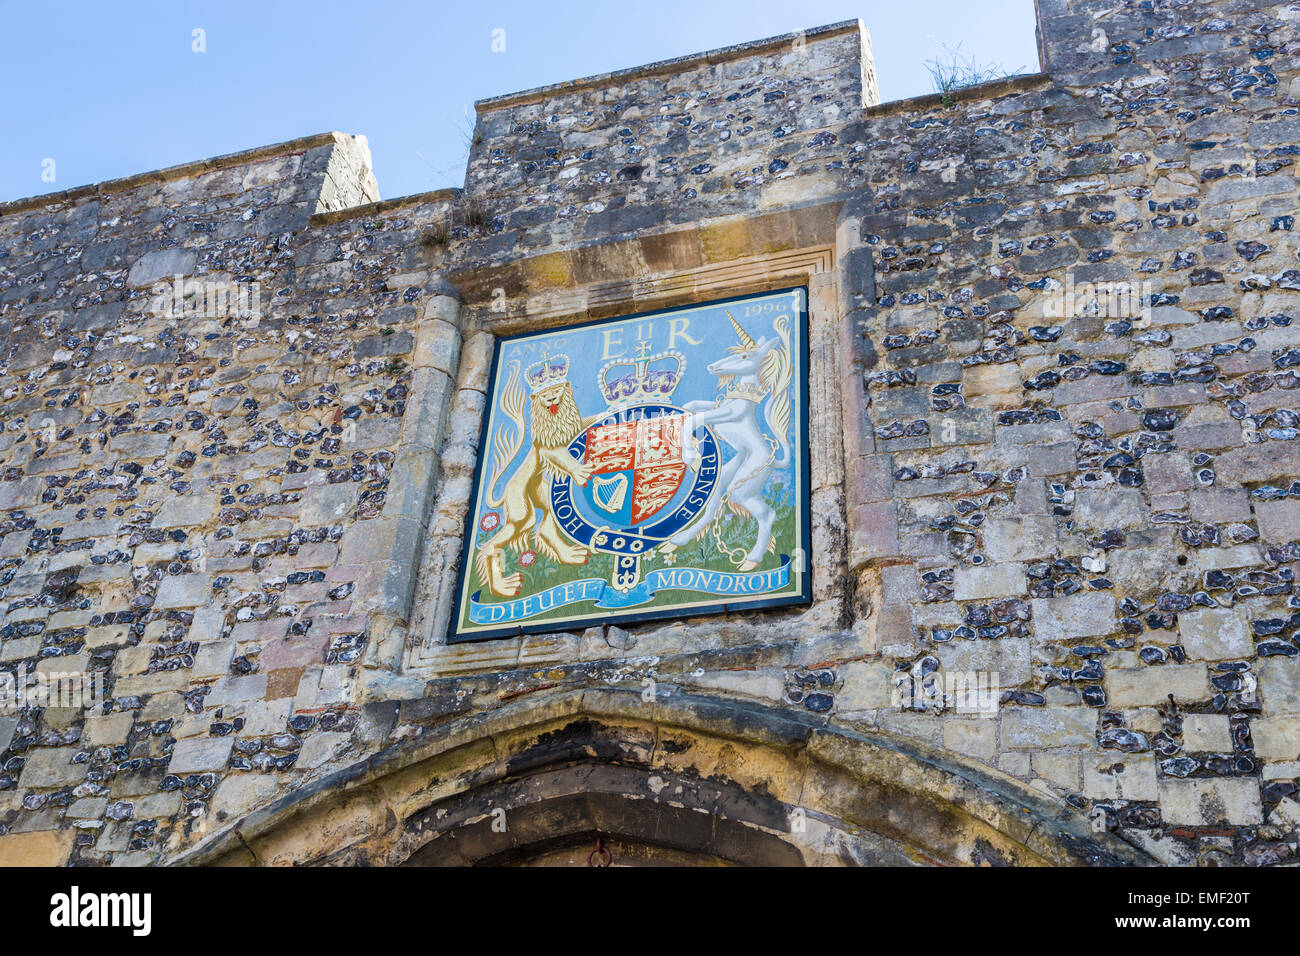 Sightseeing in Winchester: Dieu et Mon Droit coat of arms at the entrance to the historic Cathedral Square, Winchester, Hampshire, UK on a sunny day Stock Photo